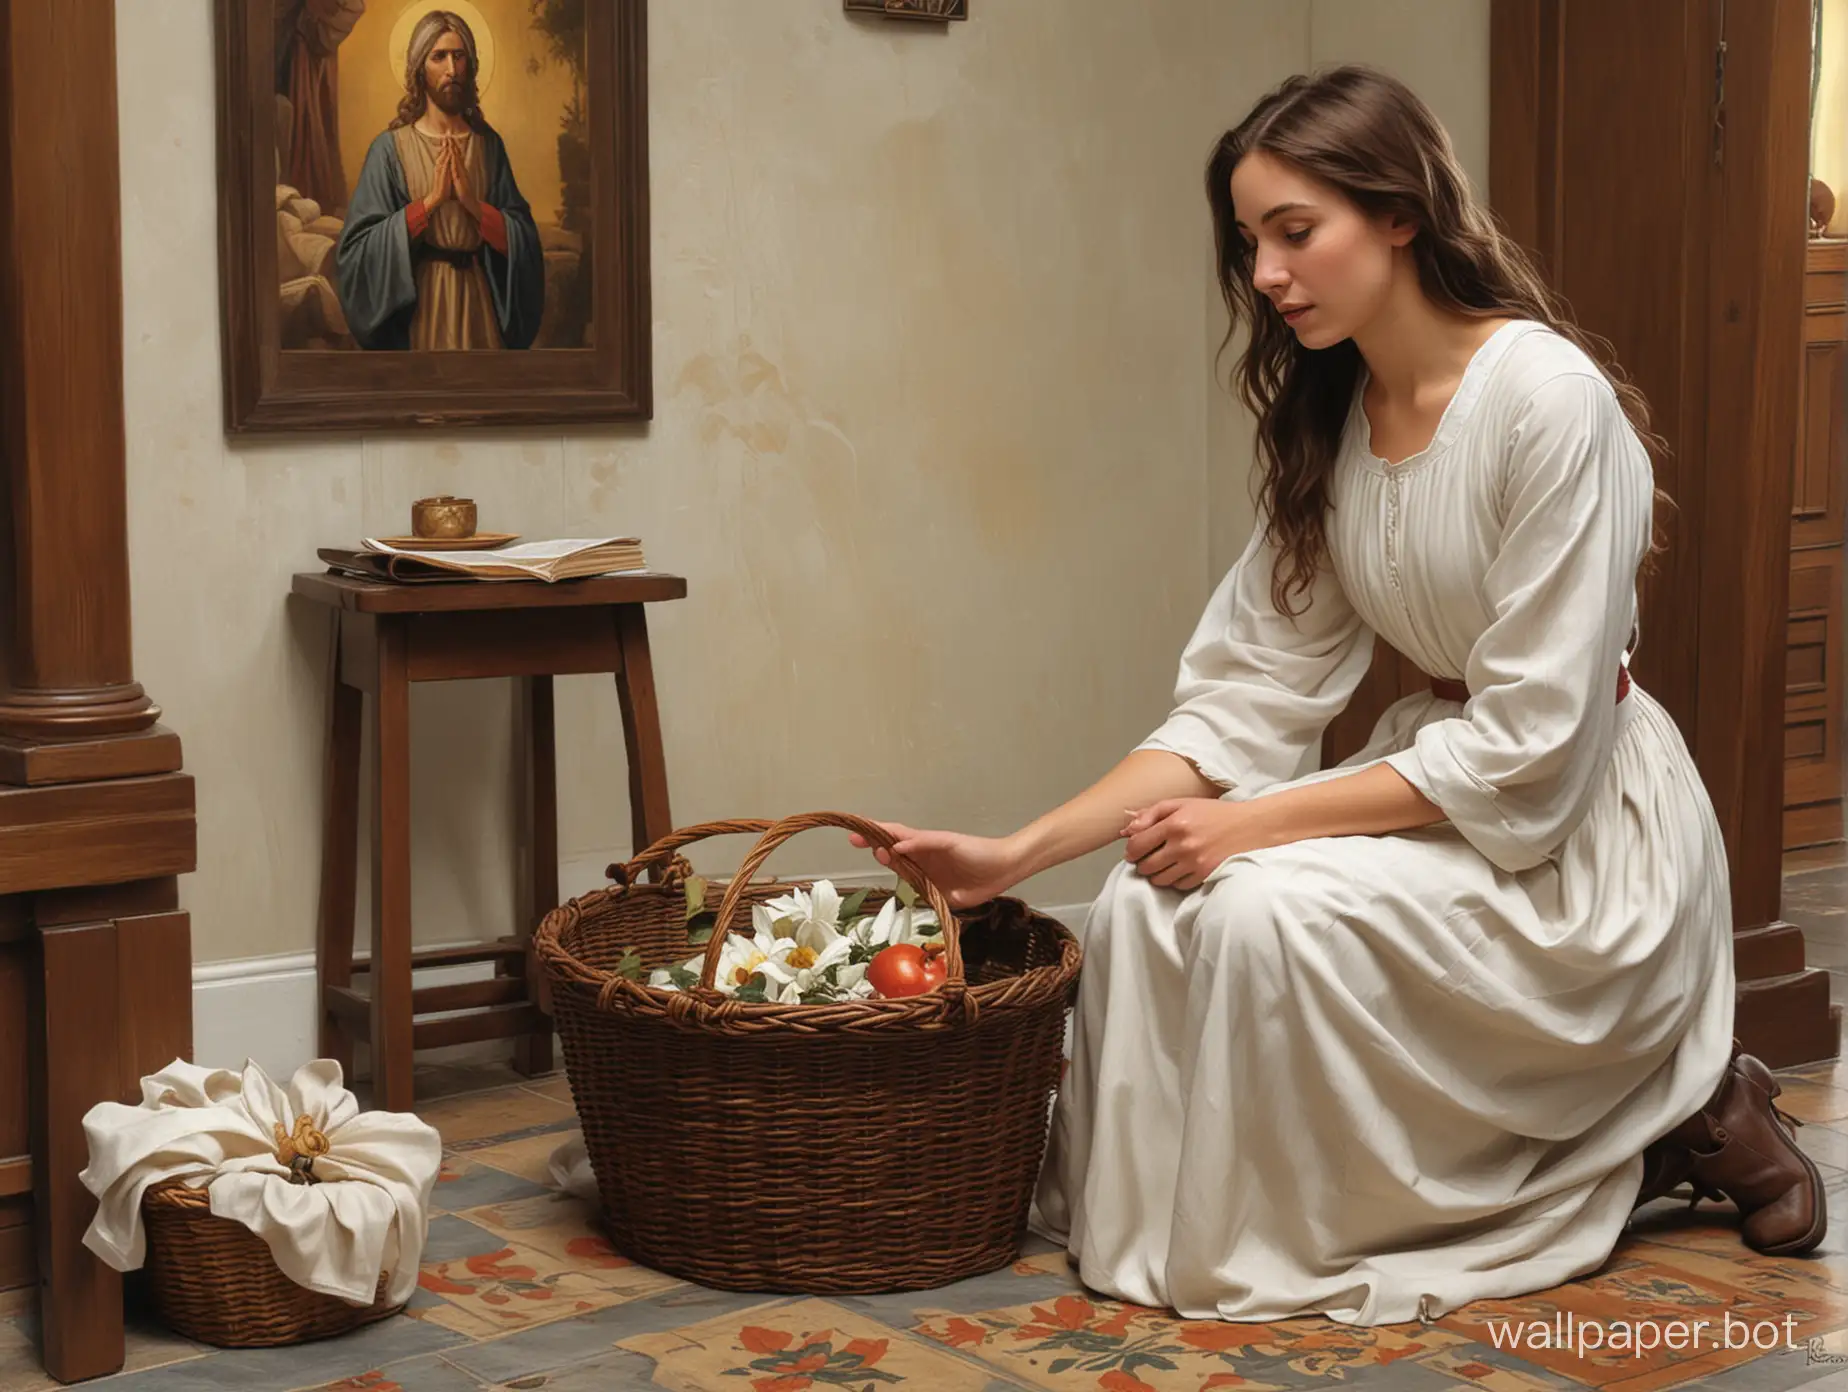 In the style of Dalhart Windberg, Norman Rockwell, and Steve Hanks, create an image of a young woman in old-fashioned attire, baskets from the 17th century, and she is kneeling at an altar of the Catholic church looking at an image of Jesus. The scene is angular. The young woman is gazing at the image of Jesus with serene and tranquil countenance, demonstrating her faith in Jesus' teachings. The image of Jesus is large, Jesus is smiling, and seems to understand the young woman's plea. A moving scene is unique.